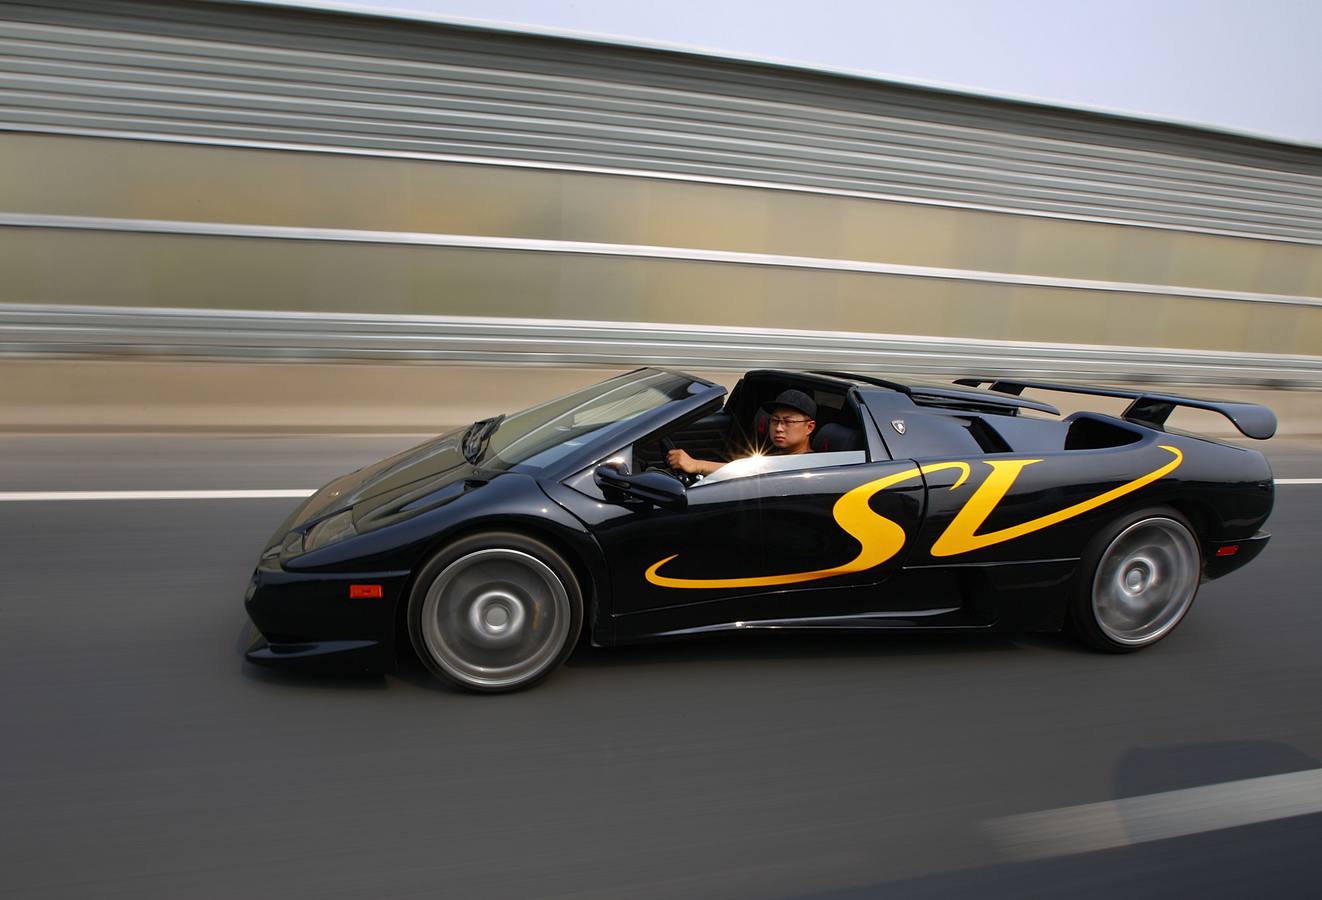 Wang Yu drives a handmade replica of the Lamborghini Diablo on a highway during a test drive in Beijing. Wang Yu and his partner spent approximately 810,000 dollars on parts and workers, taking them six years to assemble the car.